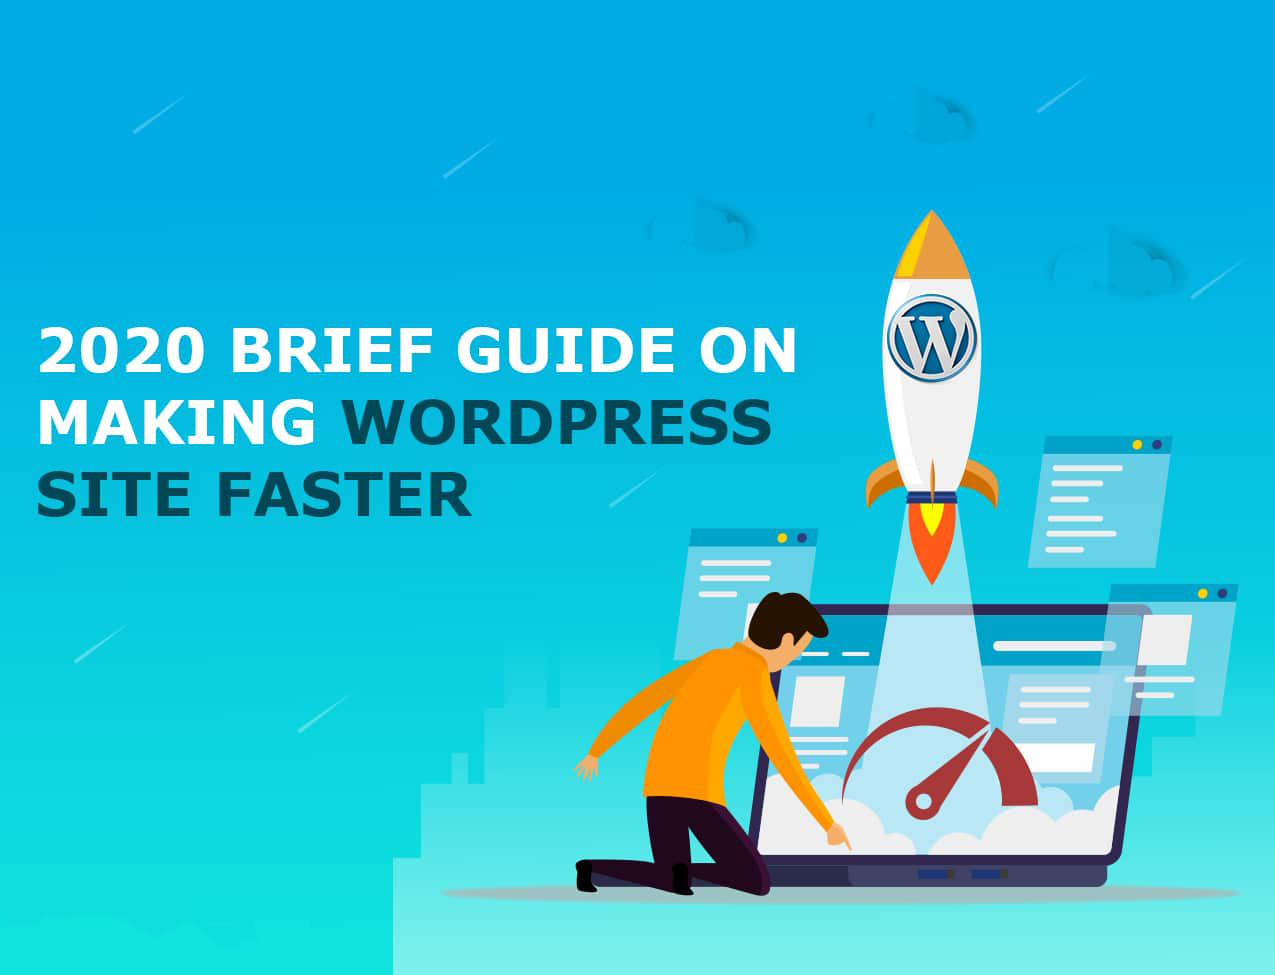 2020 Brief Guide on Making WordPress Site Faster